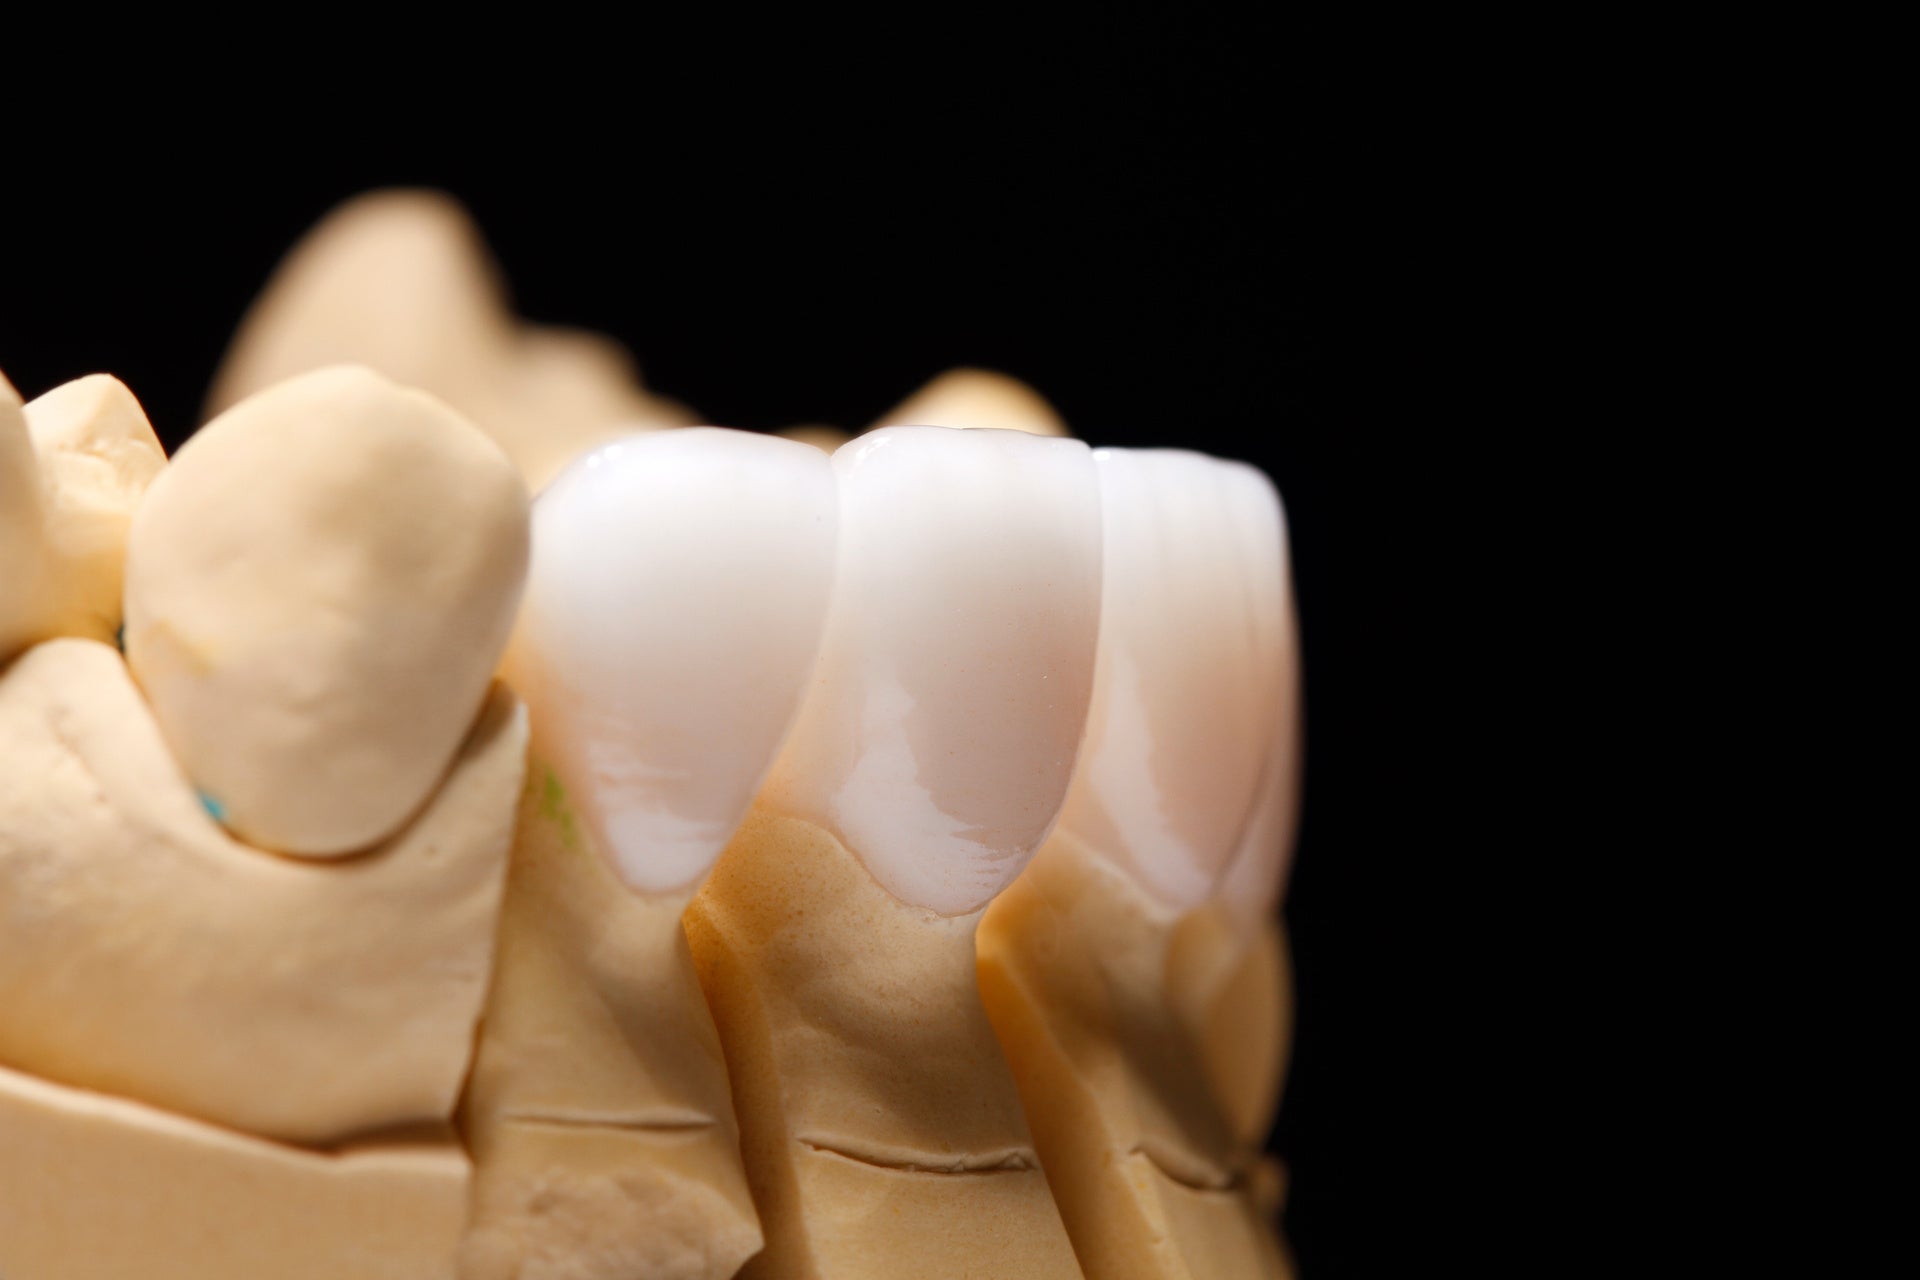 Porcelain Veneers: From Preparation to Cementation